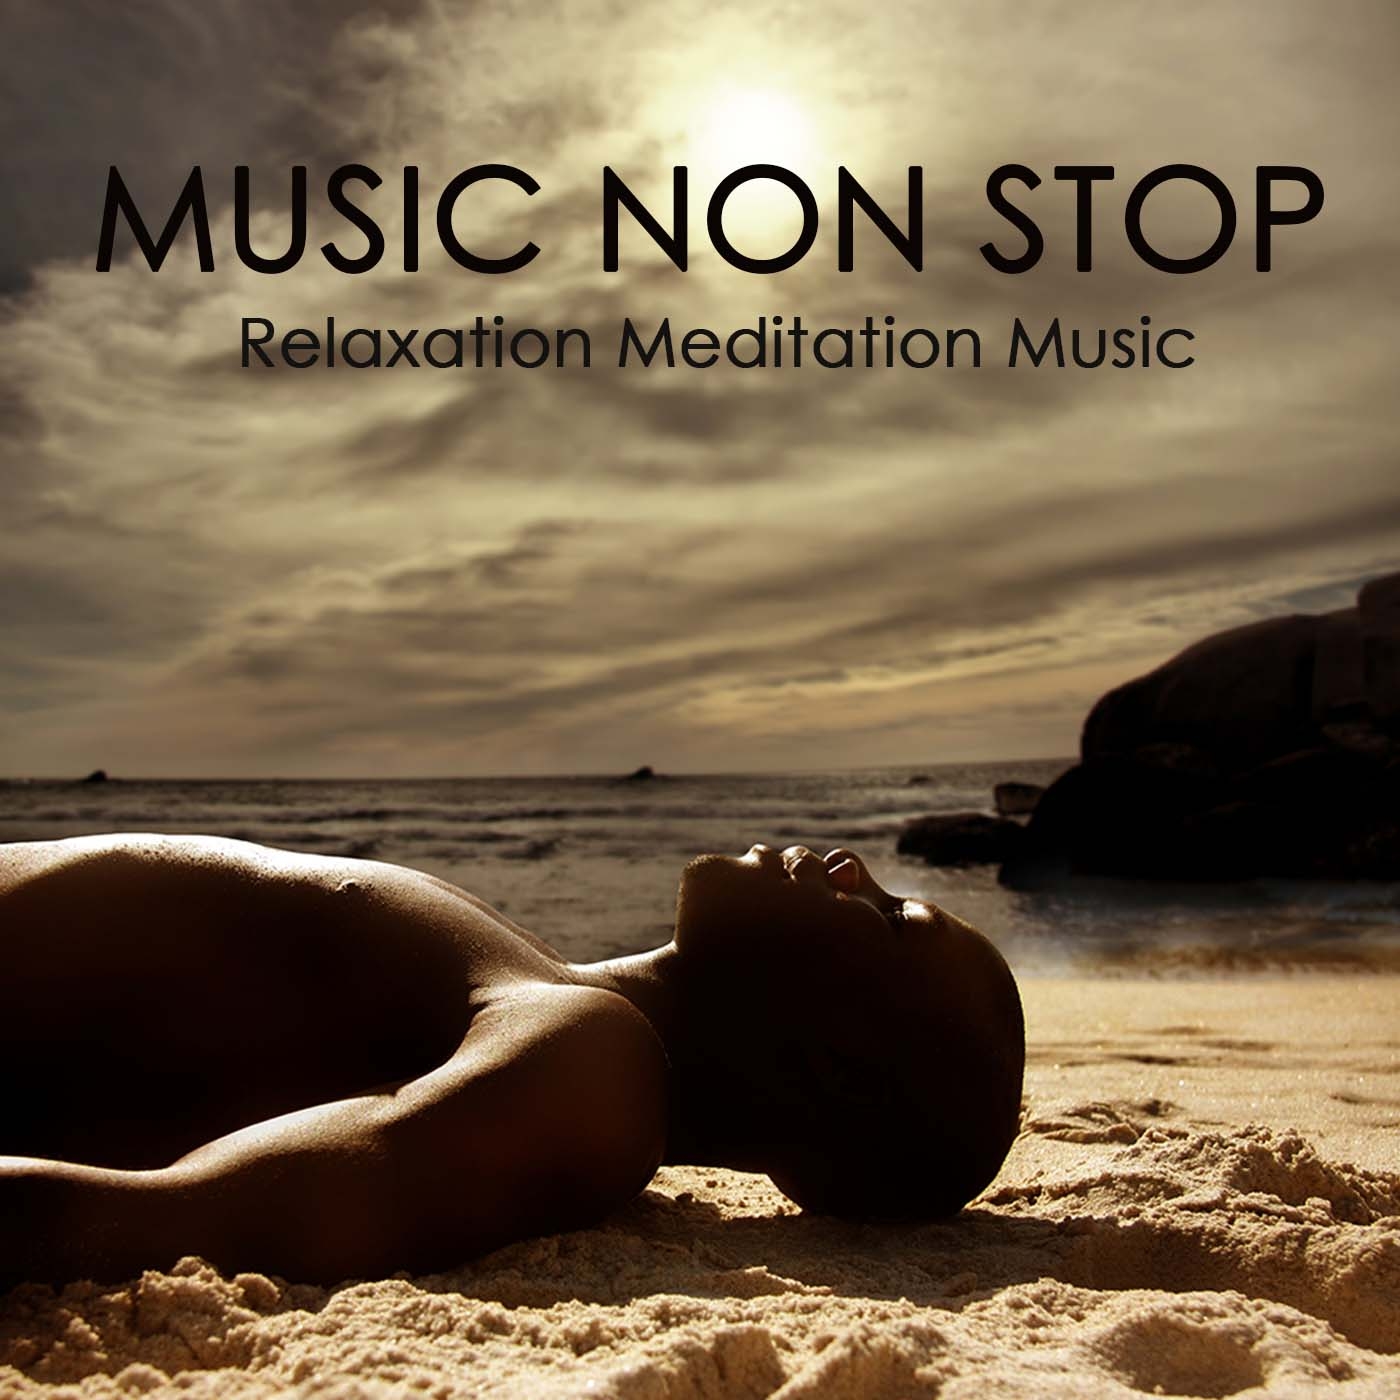 Music Non Stop: Relaxation Meditation Music